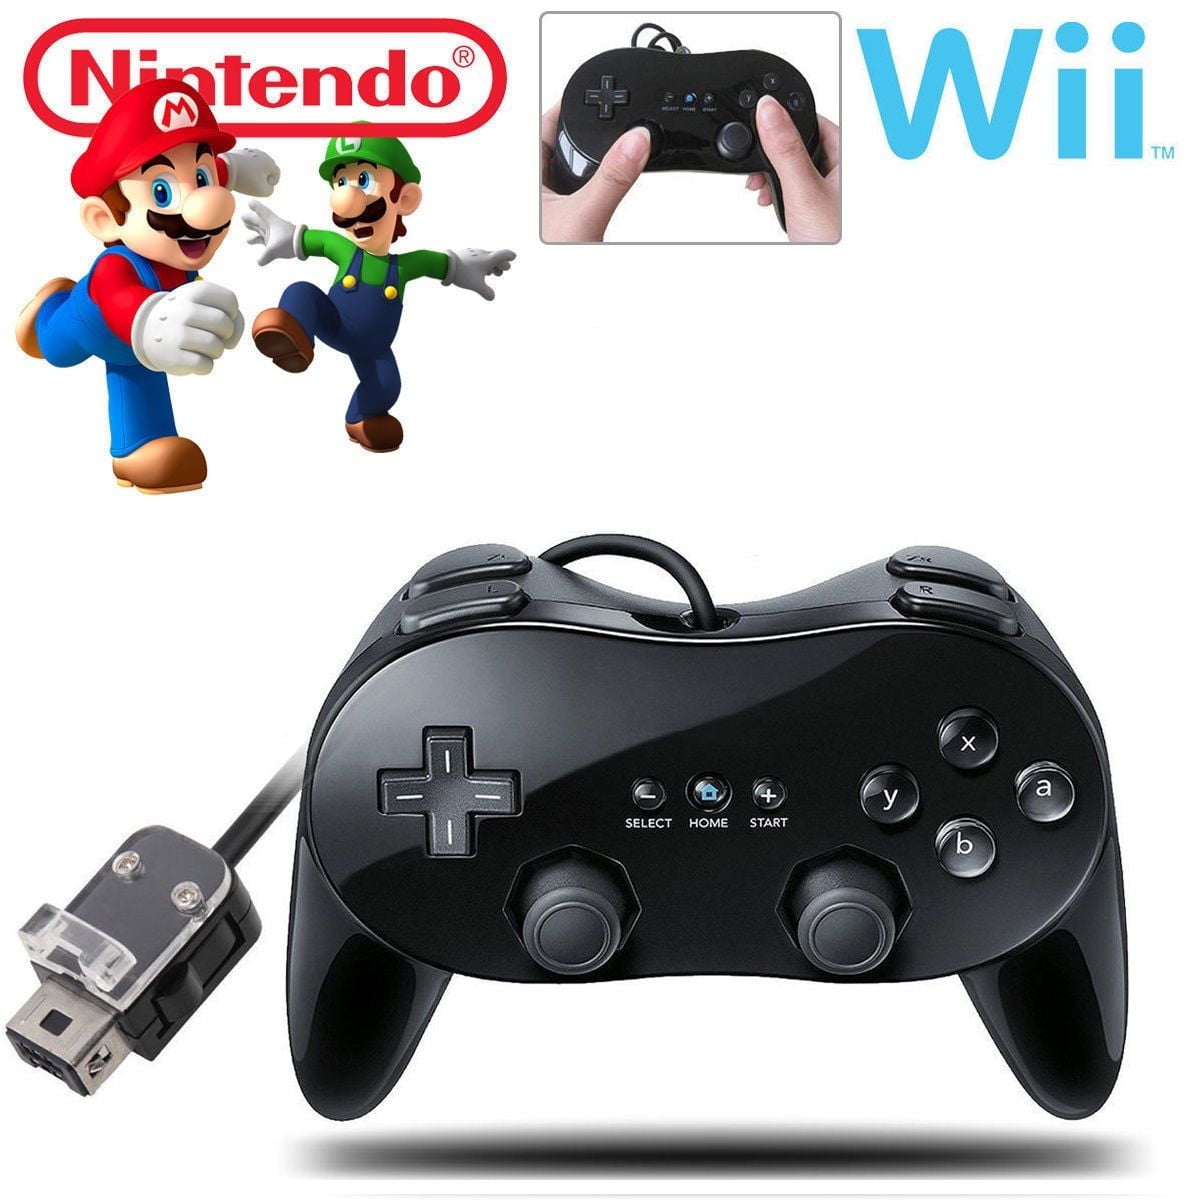 wii games compatible with classic controller